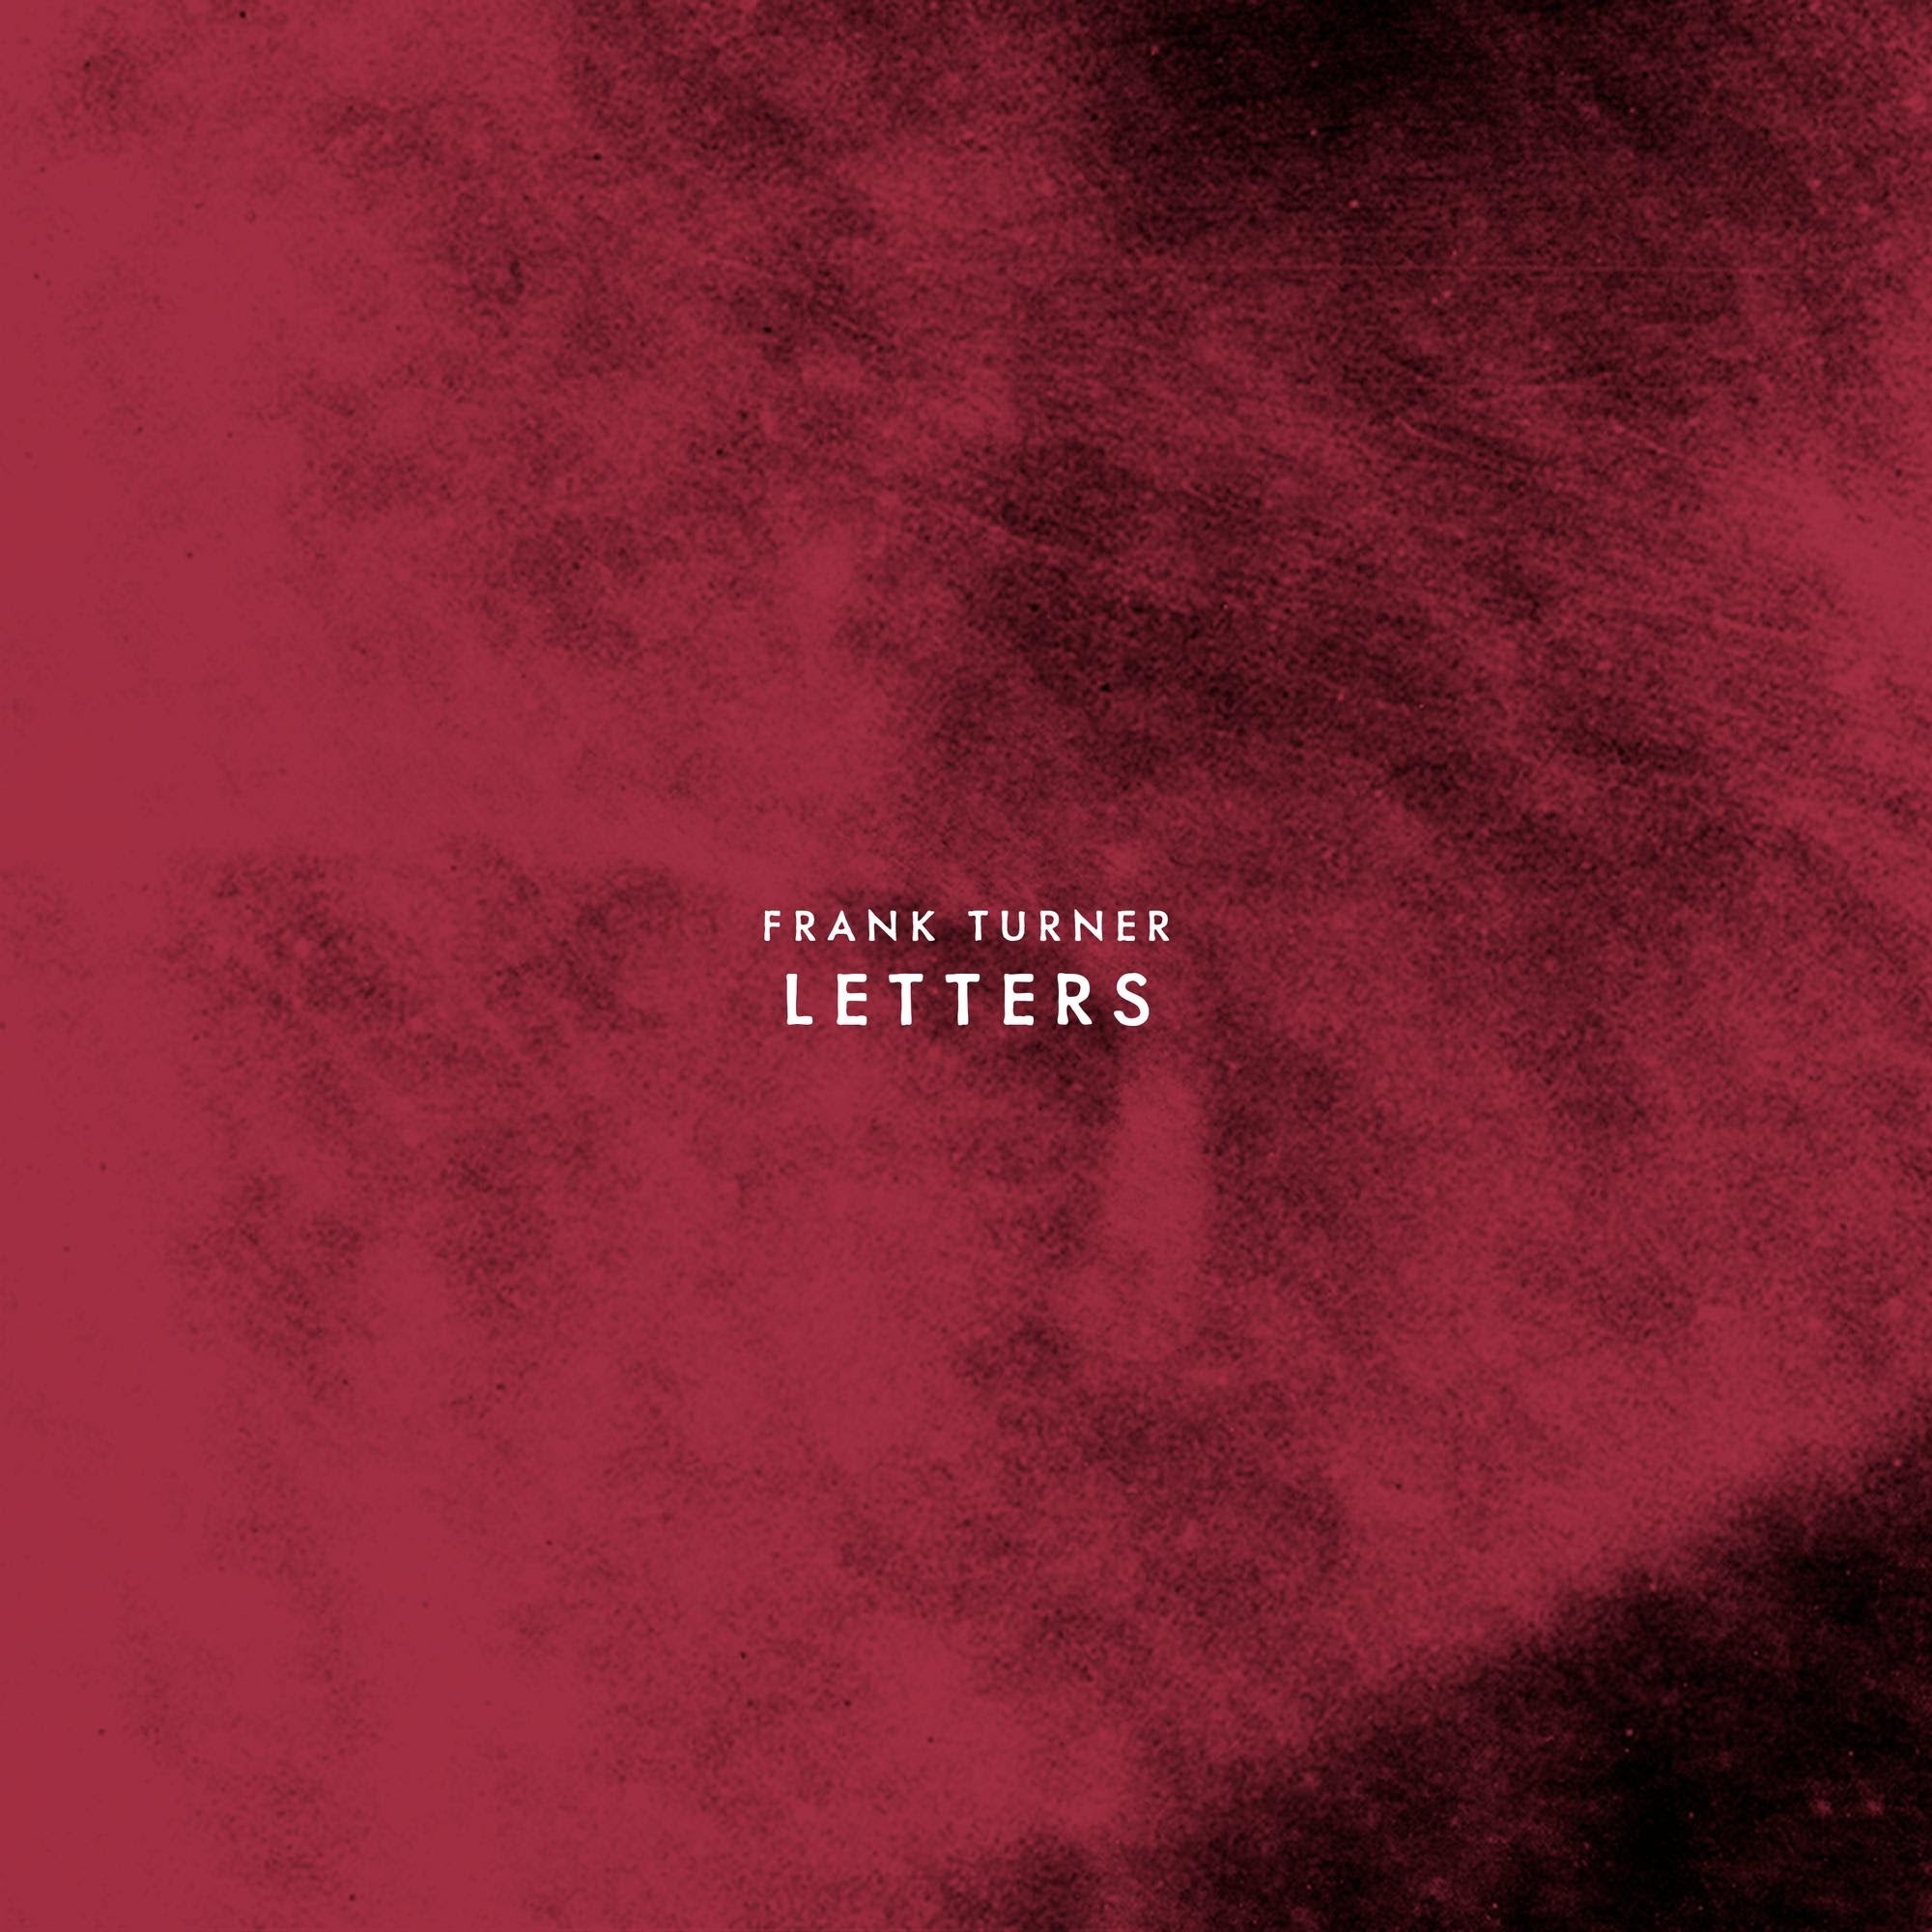 Frank Turner releases new single ‘Letters’ ahead of his highly anticipated album ‘Undefeated’